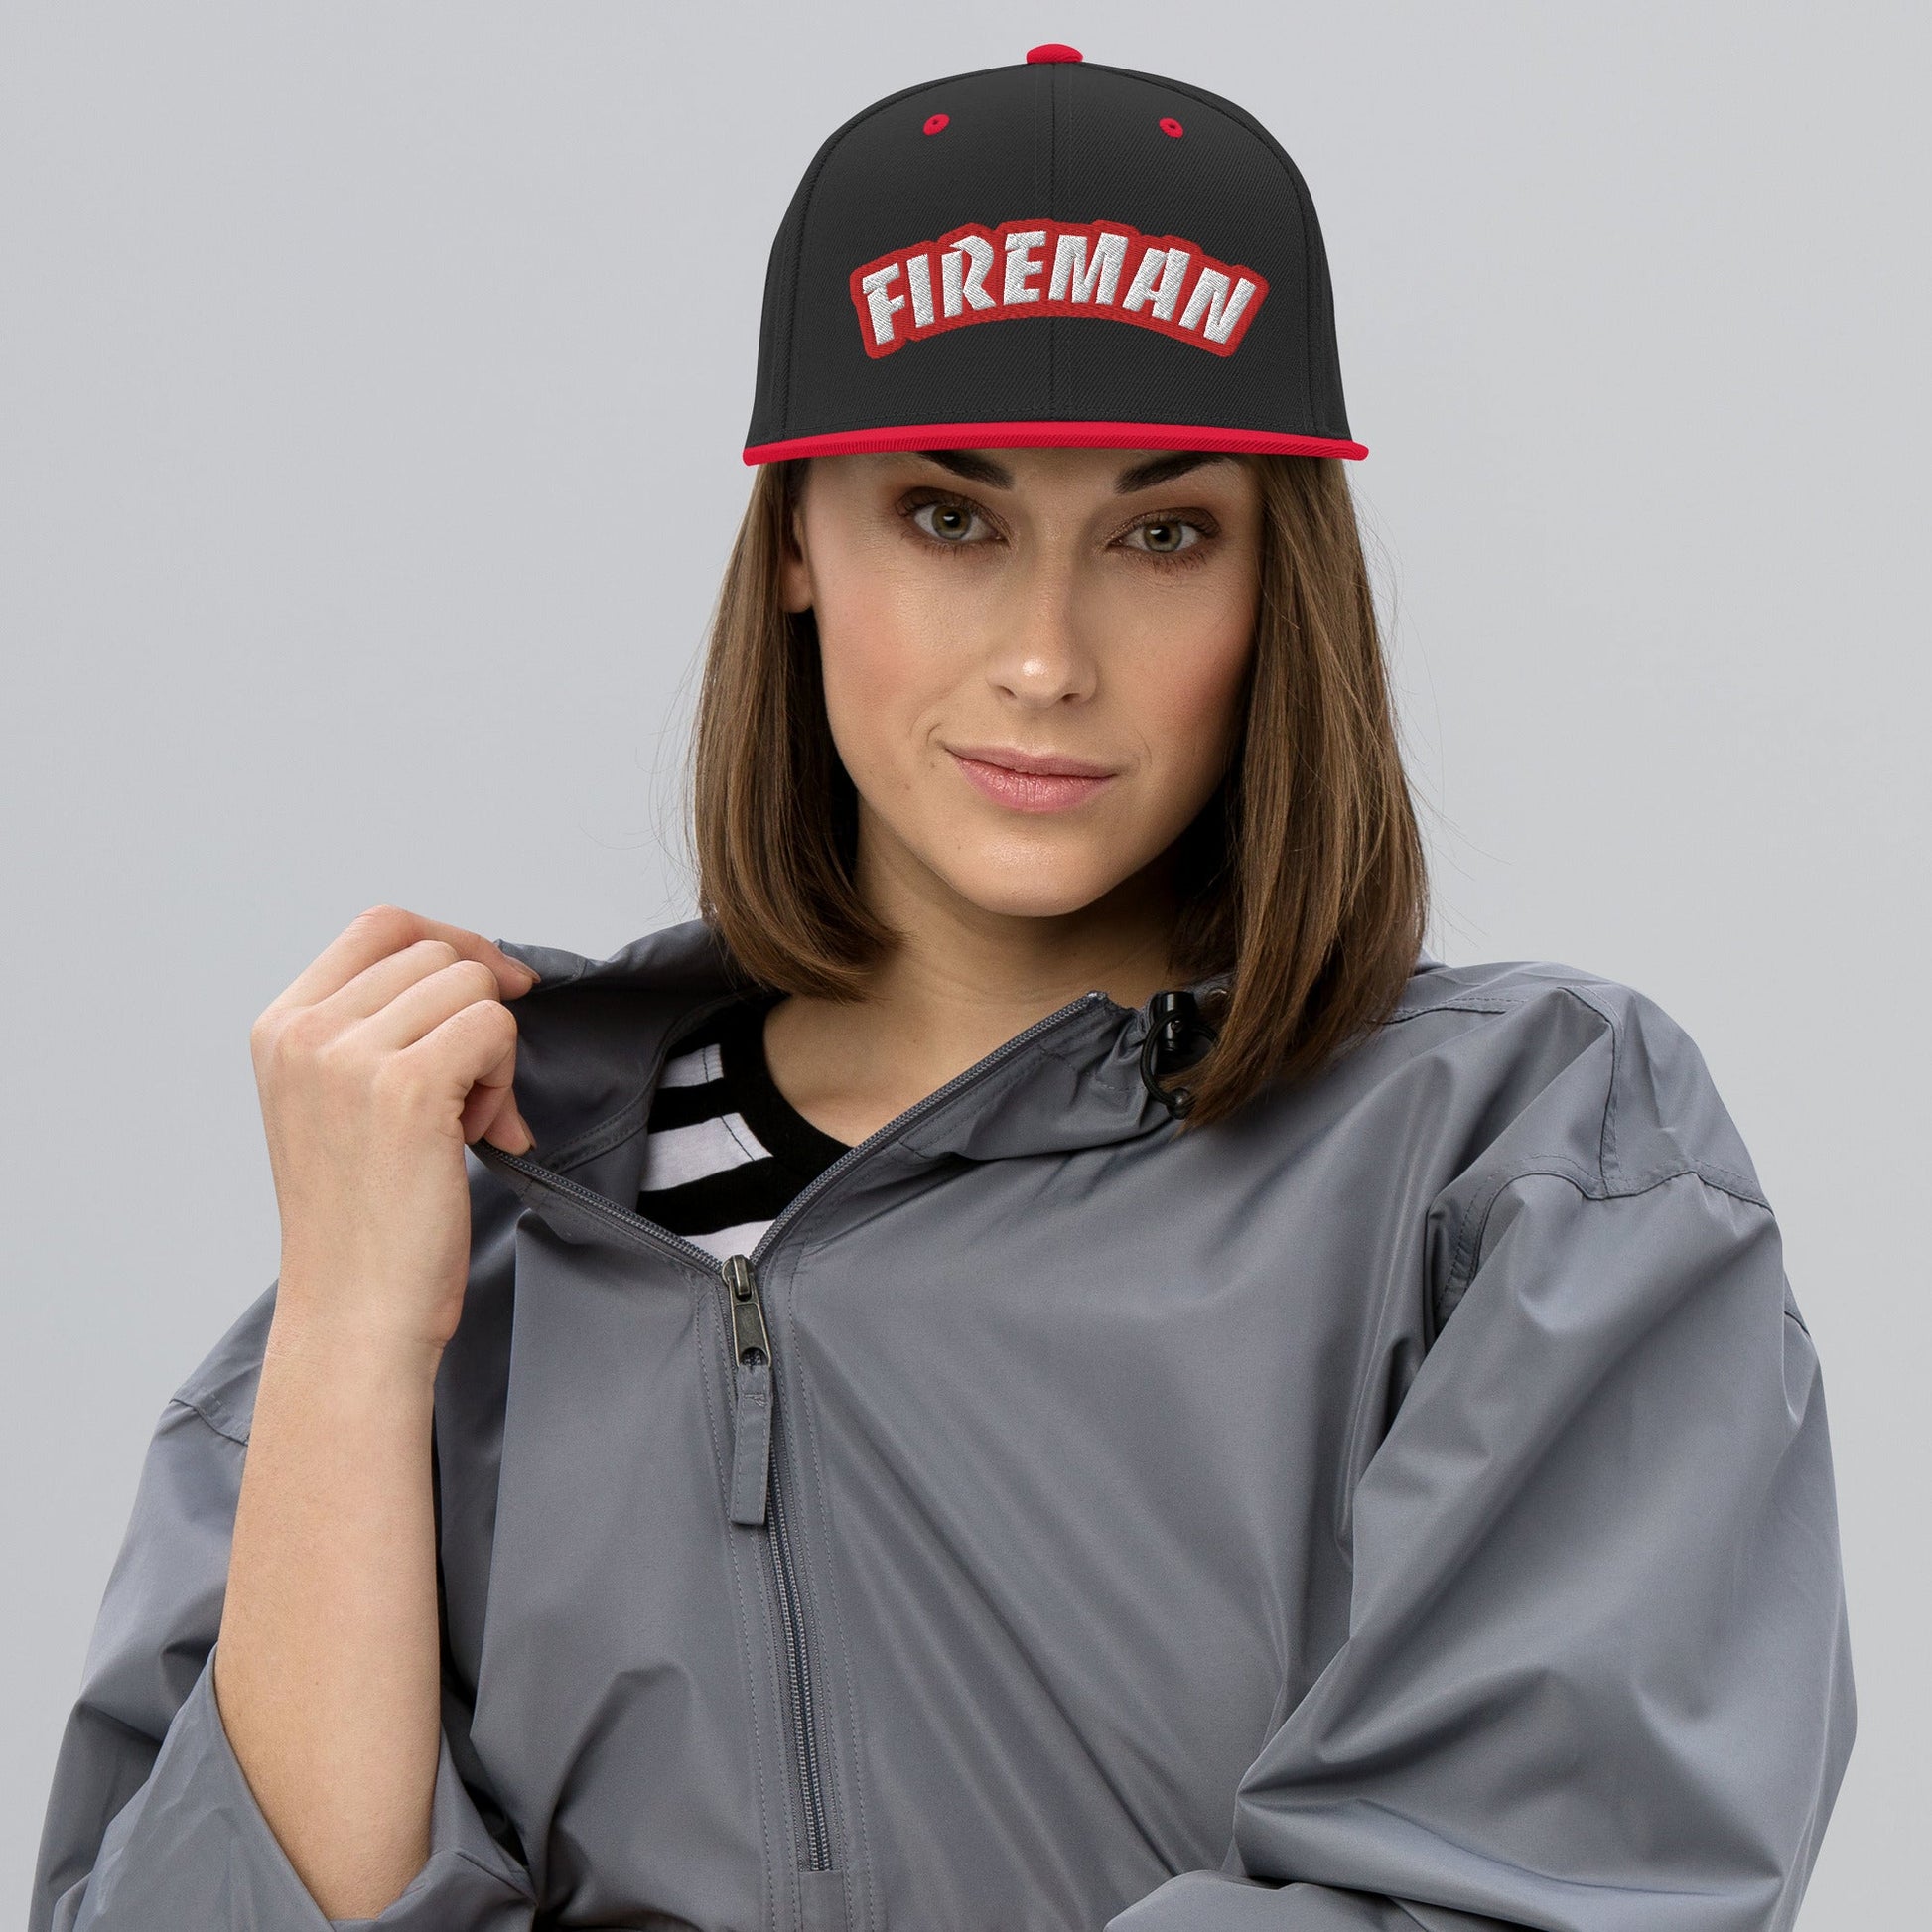 Woman wearing black and red snapback with Fireman text on white background